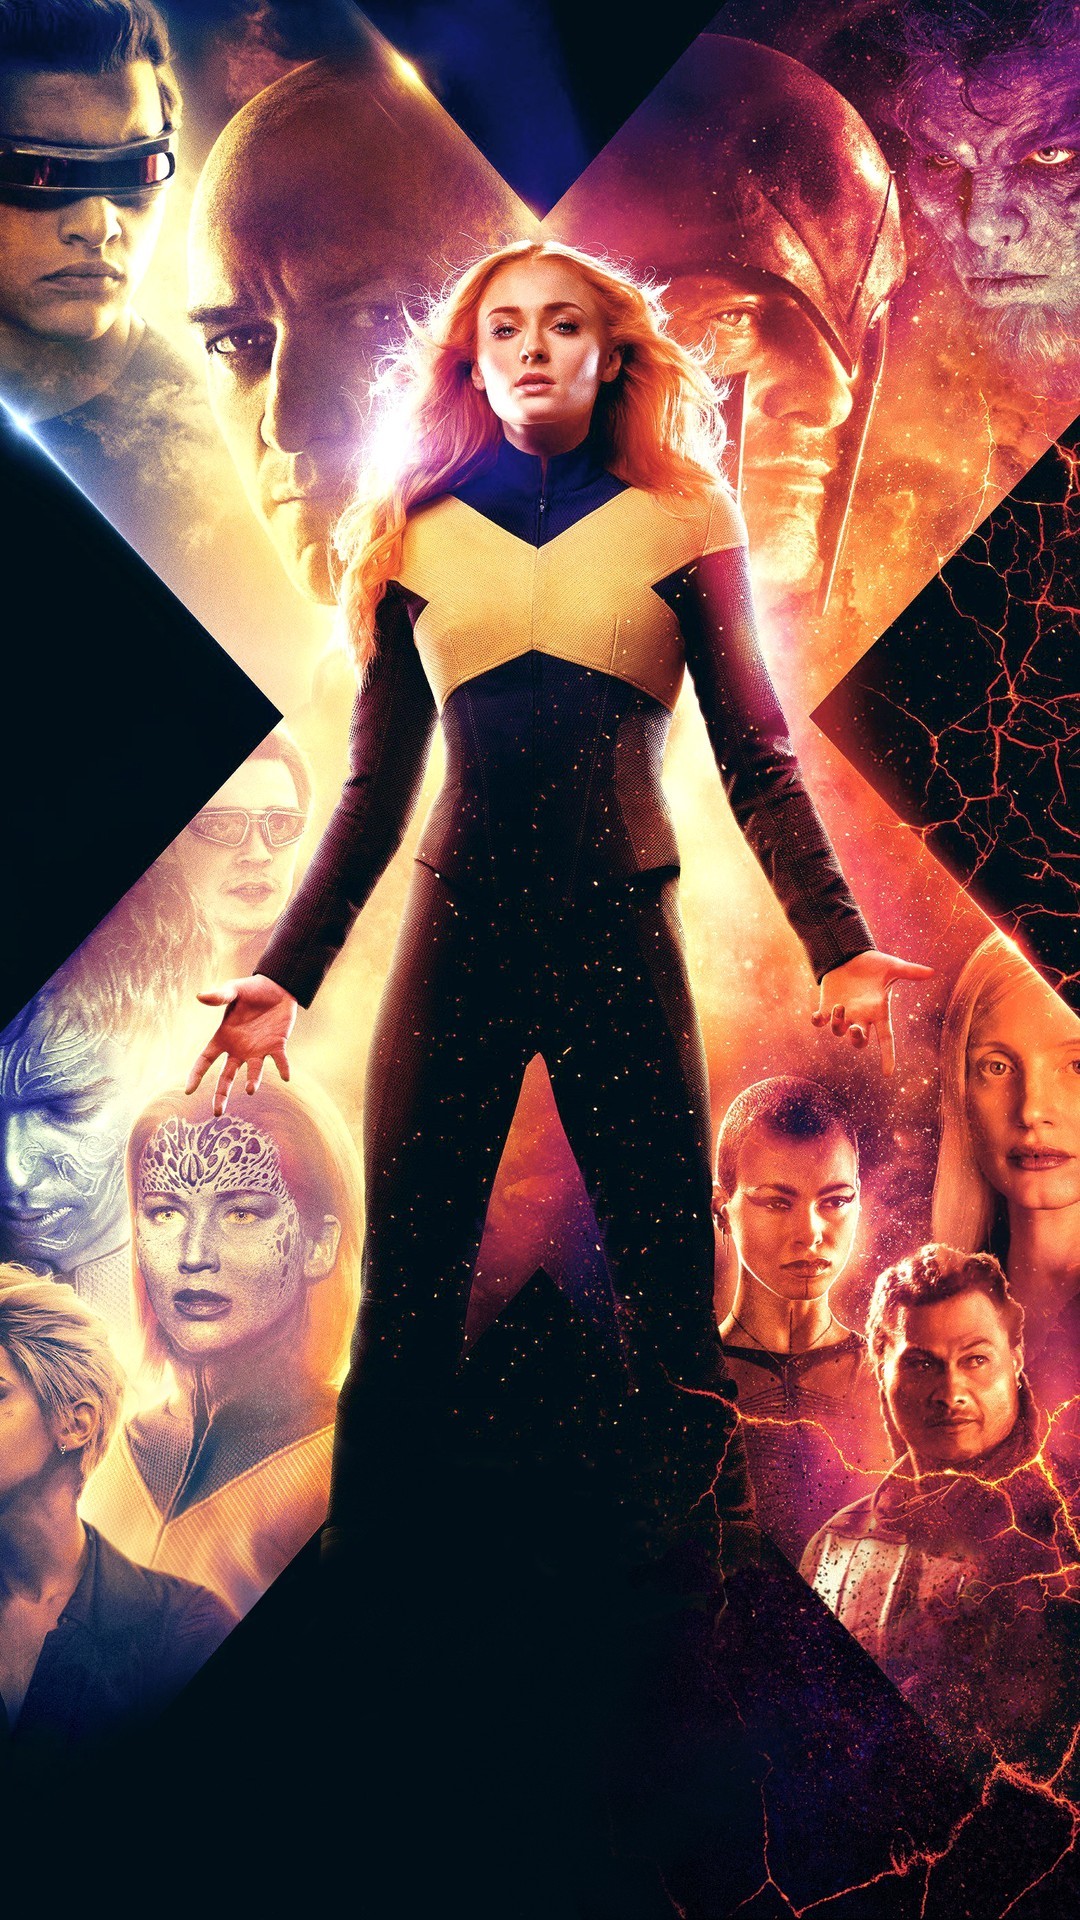 Dark Phoenix Wallpaper For Phone HD with high-resolution 1080x1920 pixel. Download all Mobile Wallpapers and Use them as wallpapers for your iPhone, Tablet, iPad, Android and other mobile devices